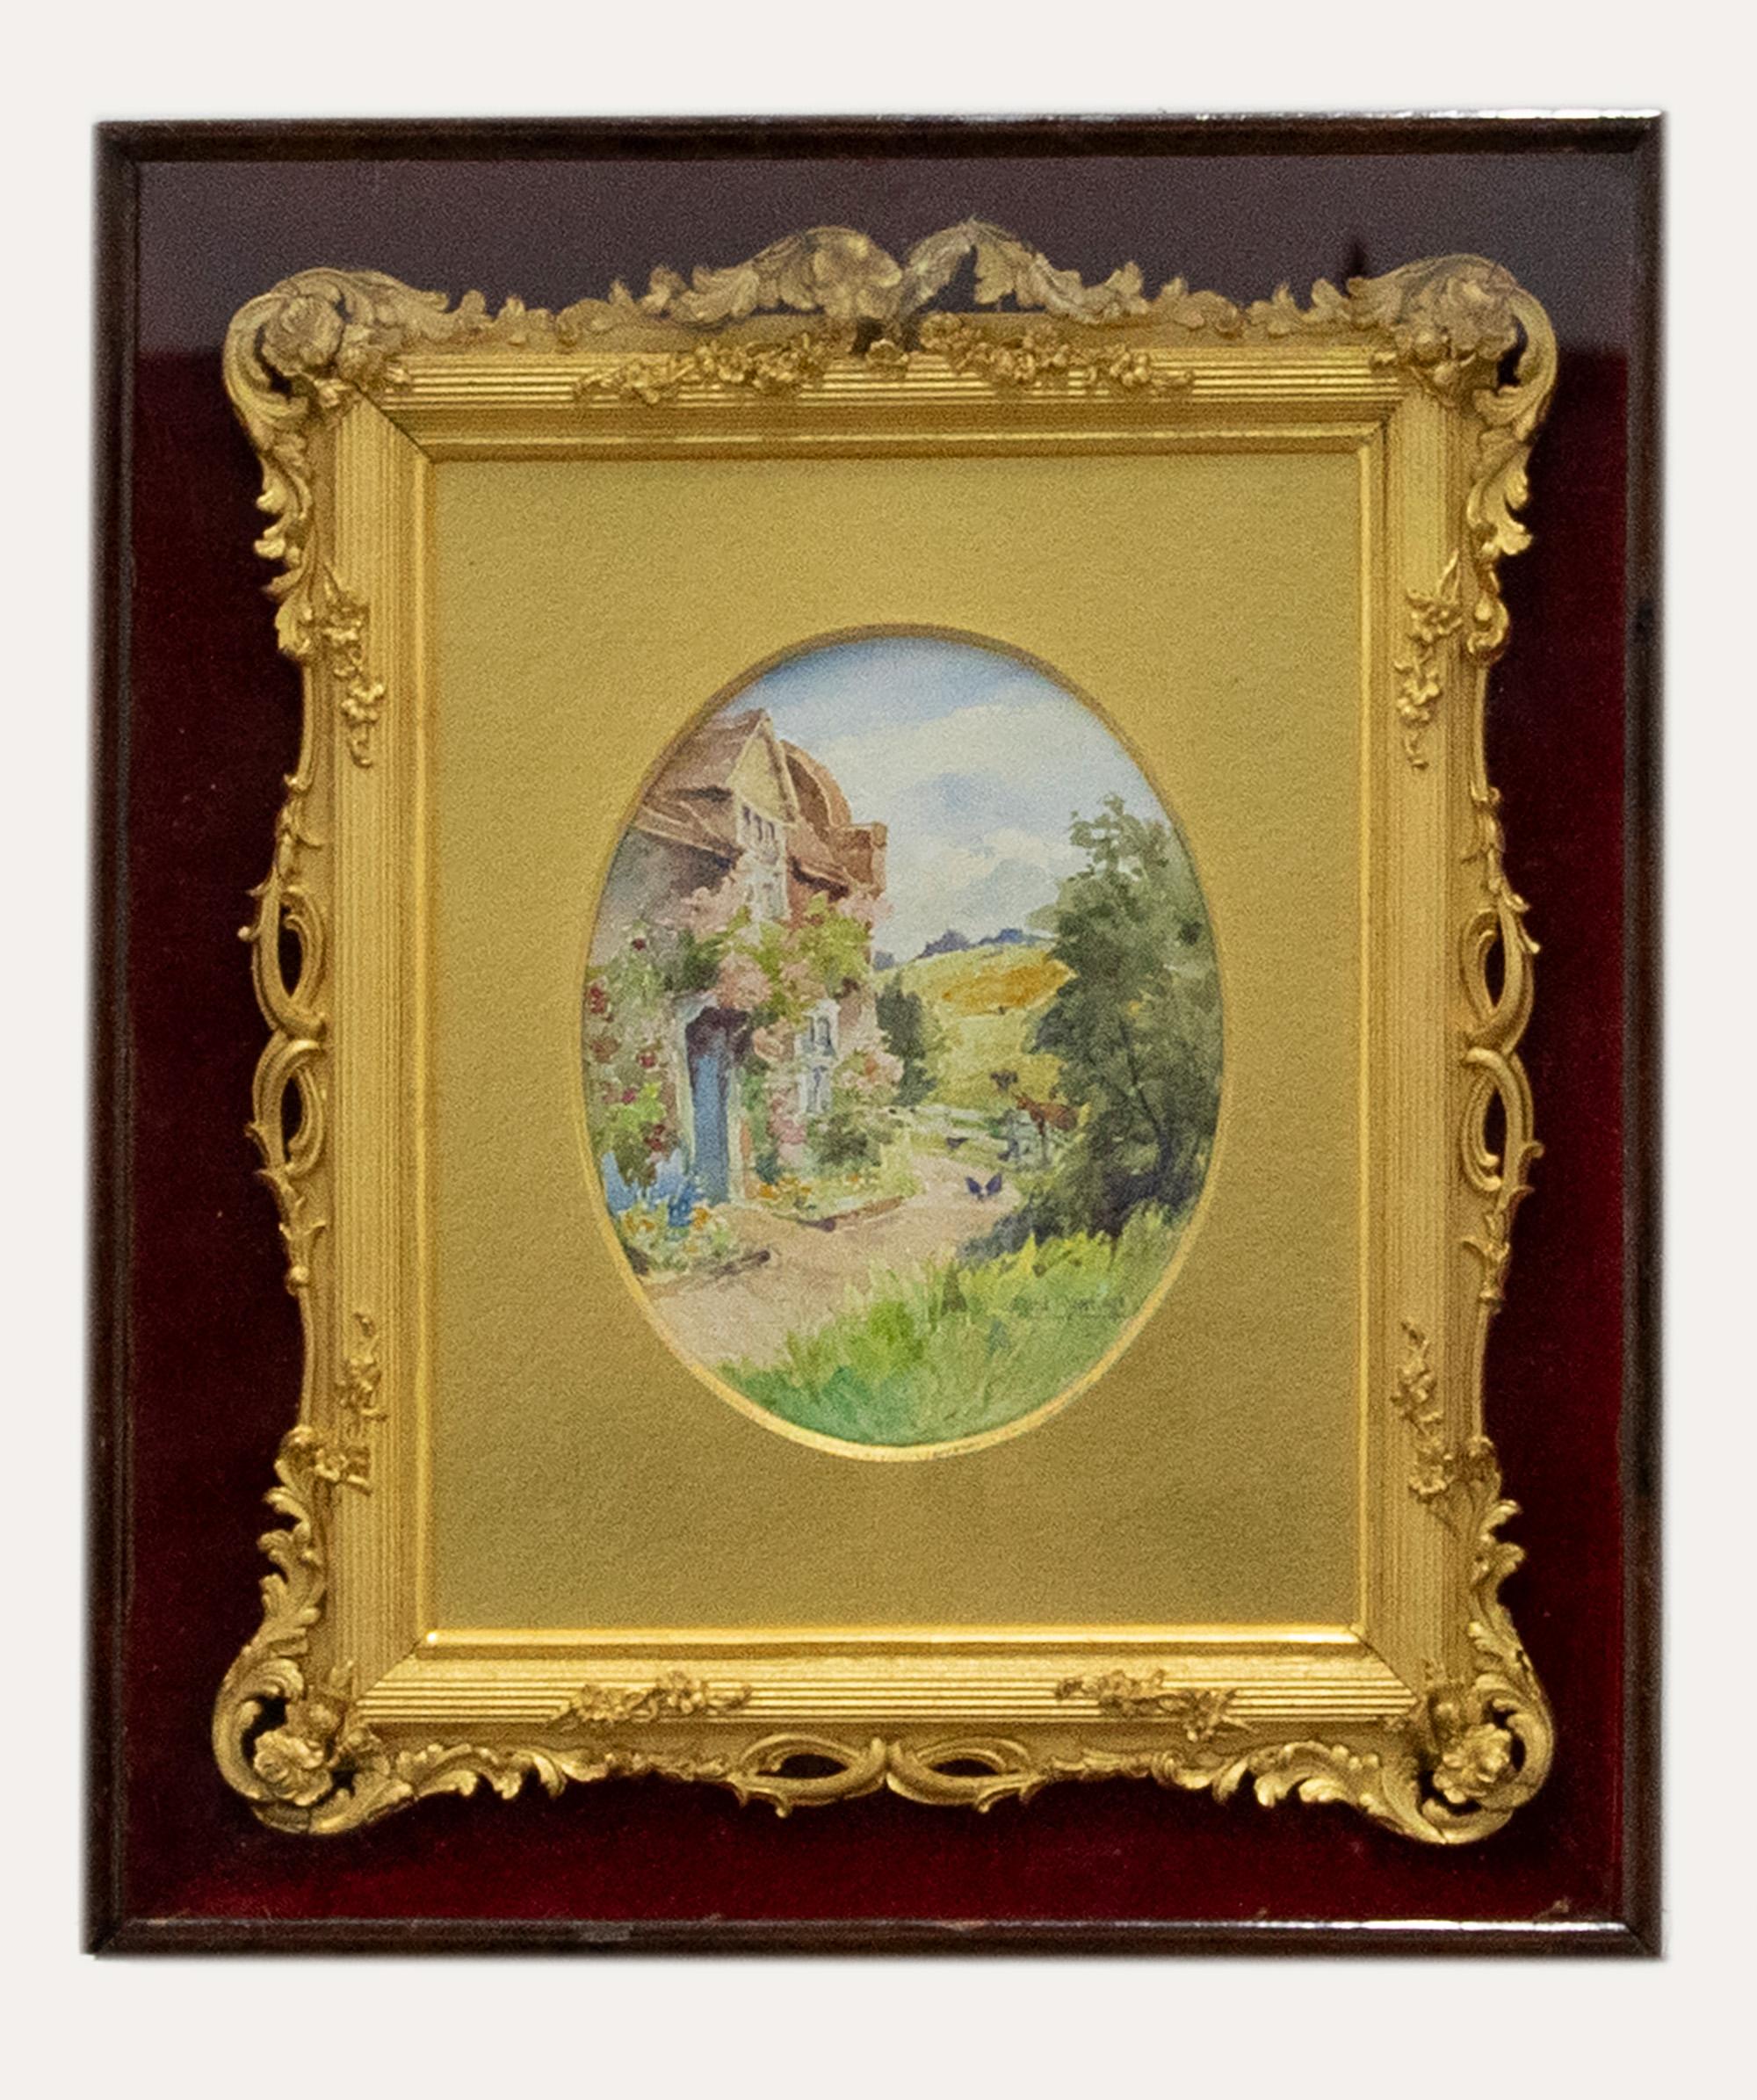 Late 19th Century Ornate Gilt Picture Frame in a Mahogany Box - Art by Unknown